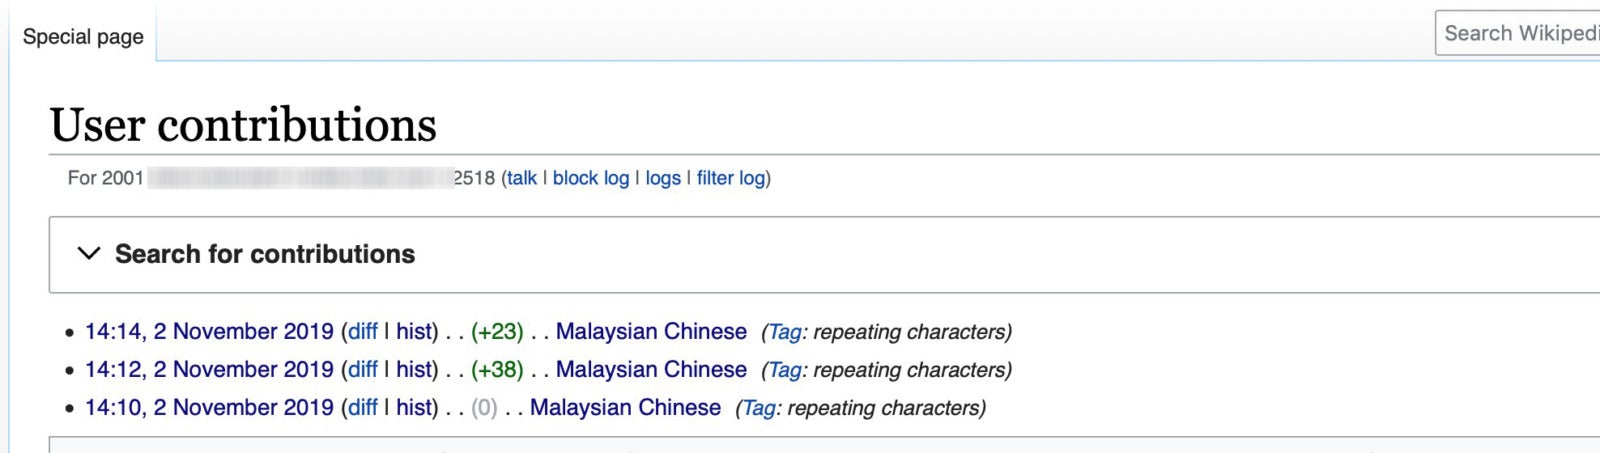 Someone Vandalised The Wikipedia Page Describing &Quot;Malaysian Chinese&Quot; &Amp; Called Them Haram - World Of Buzz 5